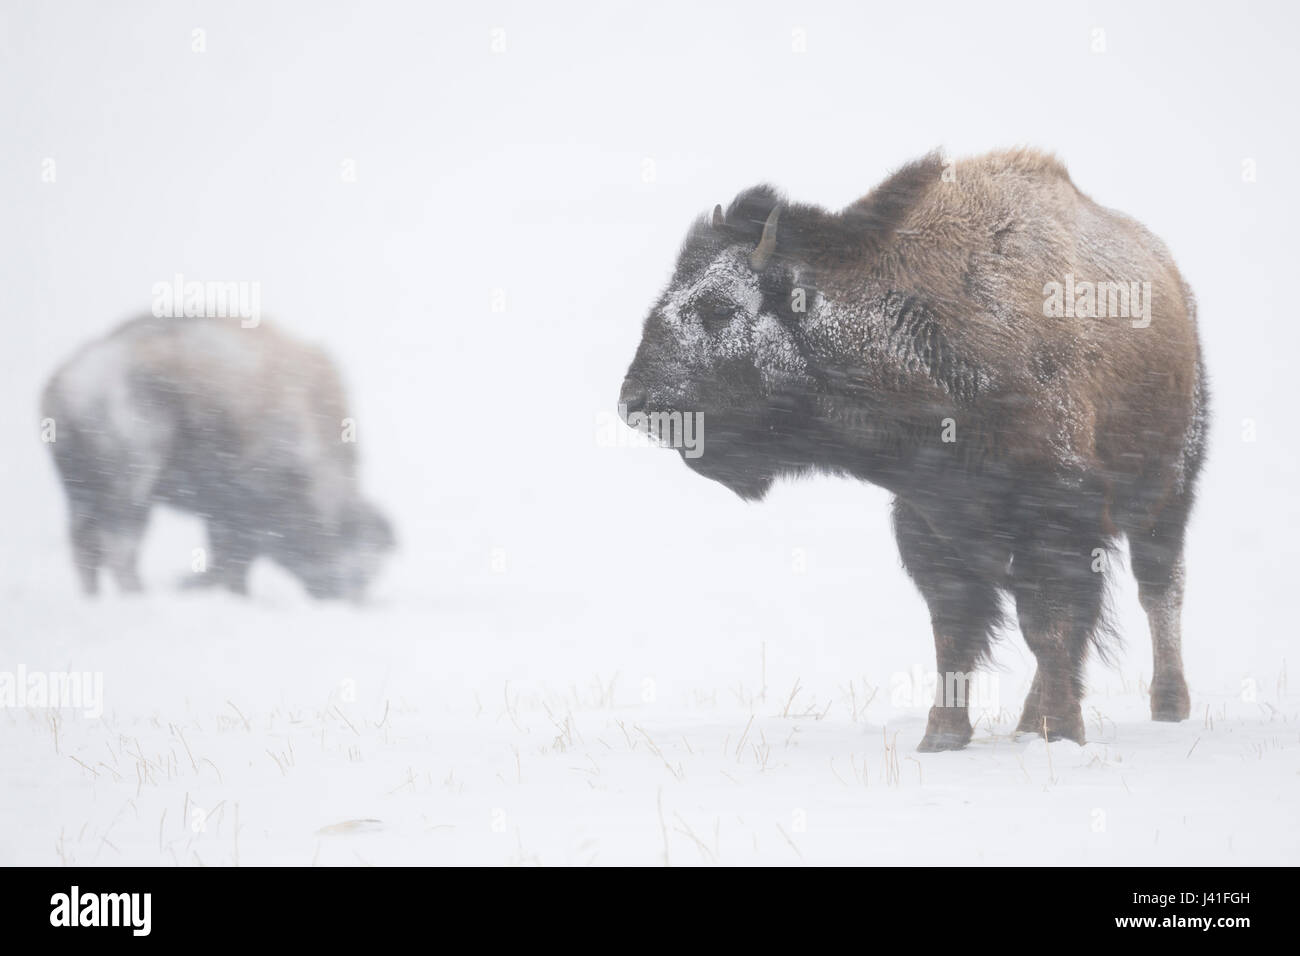 American Bison ( Bison bison ) in harsh winter weather, during a blizzard, snow storm, heavy snowfall, snow and ice crusted fur, strong winds blasting Stock Photo